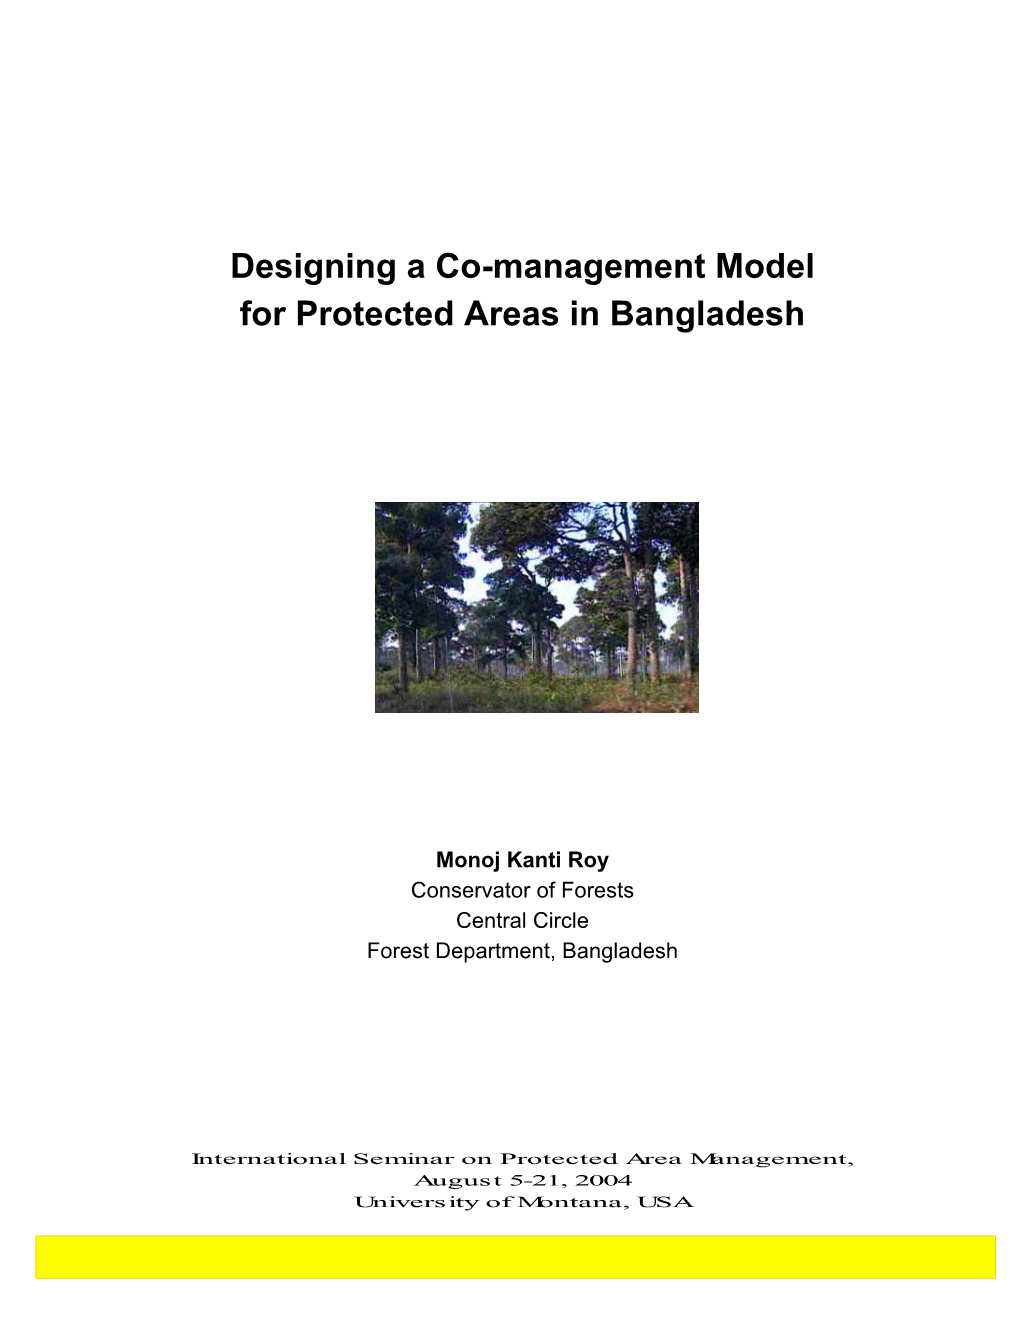 Designing a Co-Management Model for Protected Areas in Bangladesh